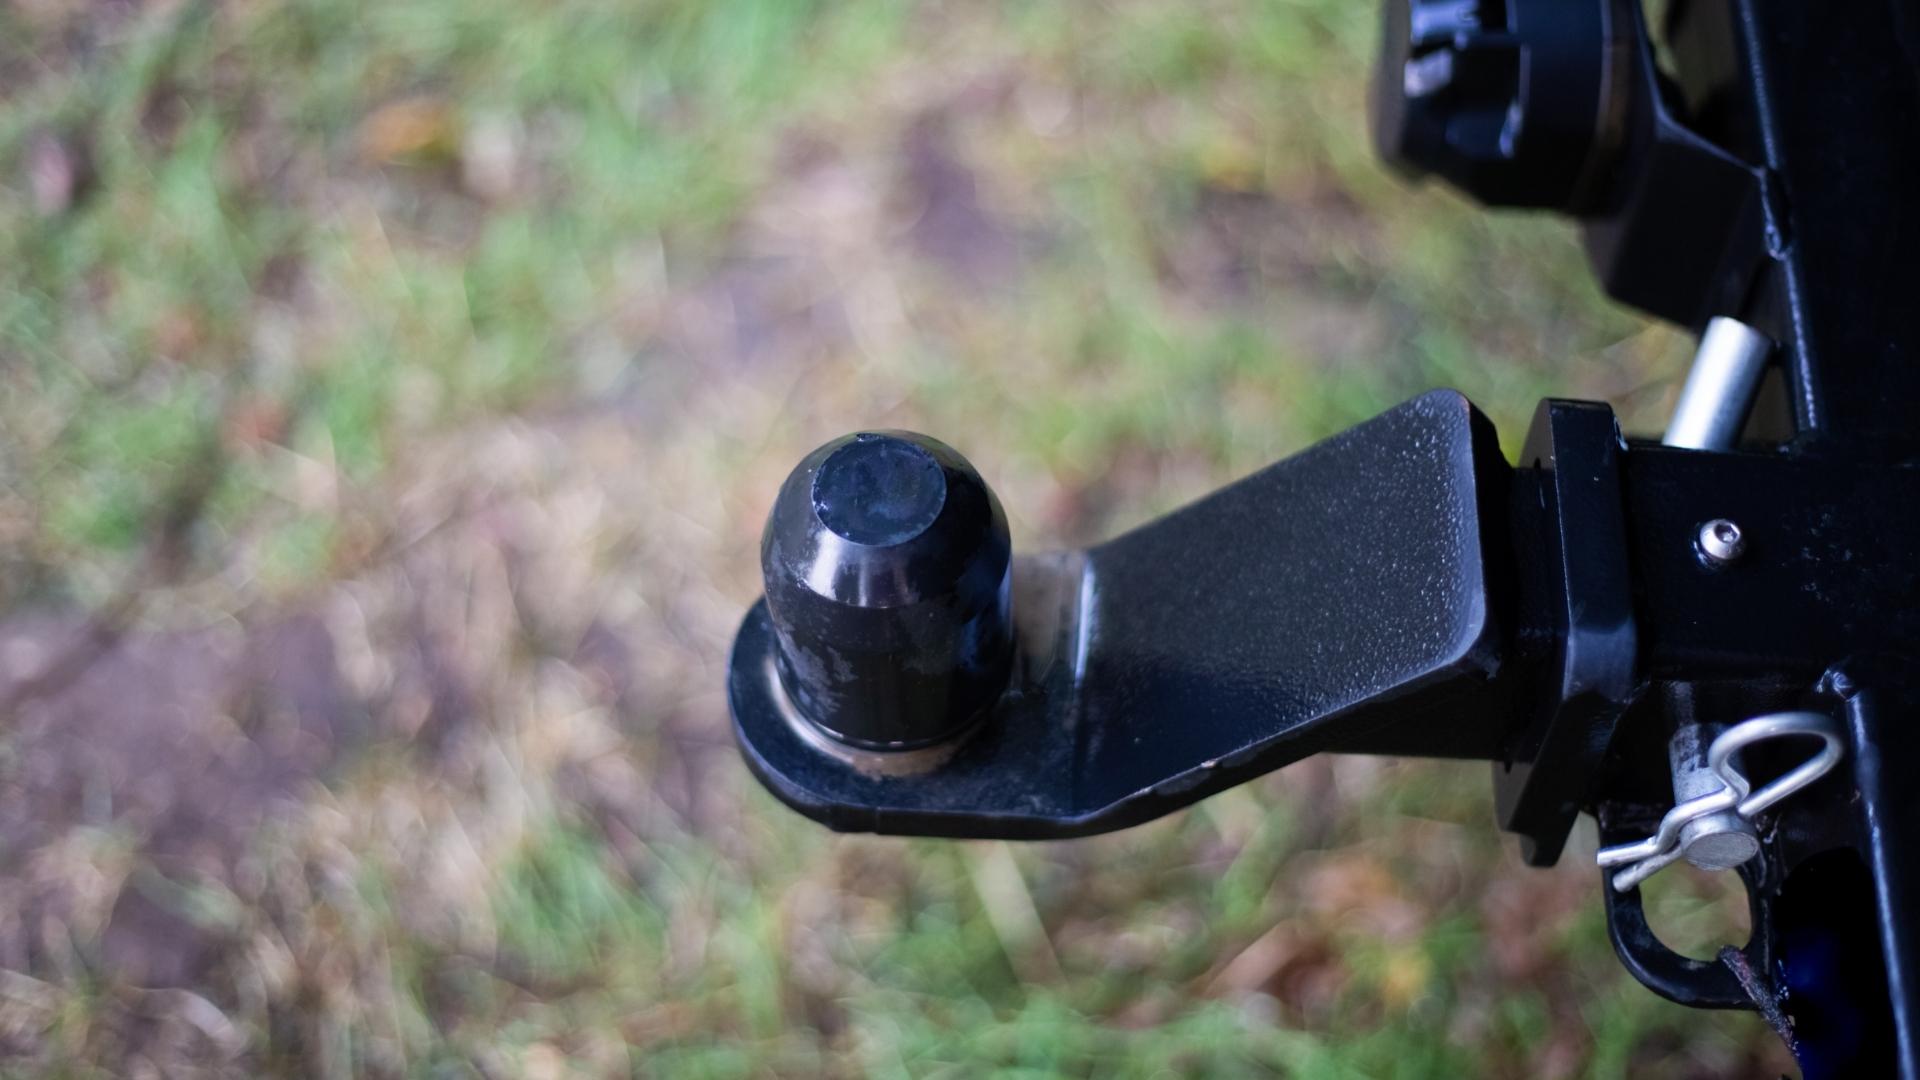 Photo of a hitch known as a "bumper pull" hitch in RV slang terms